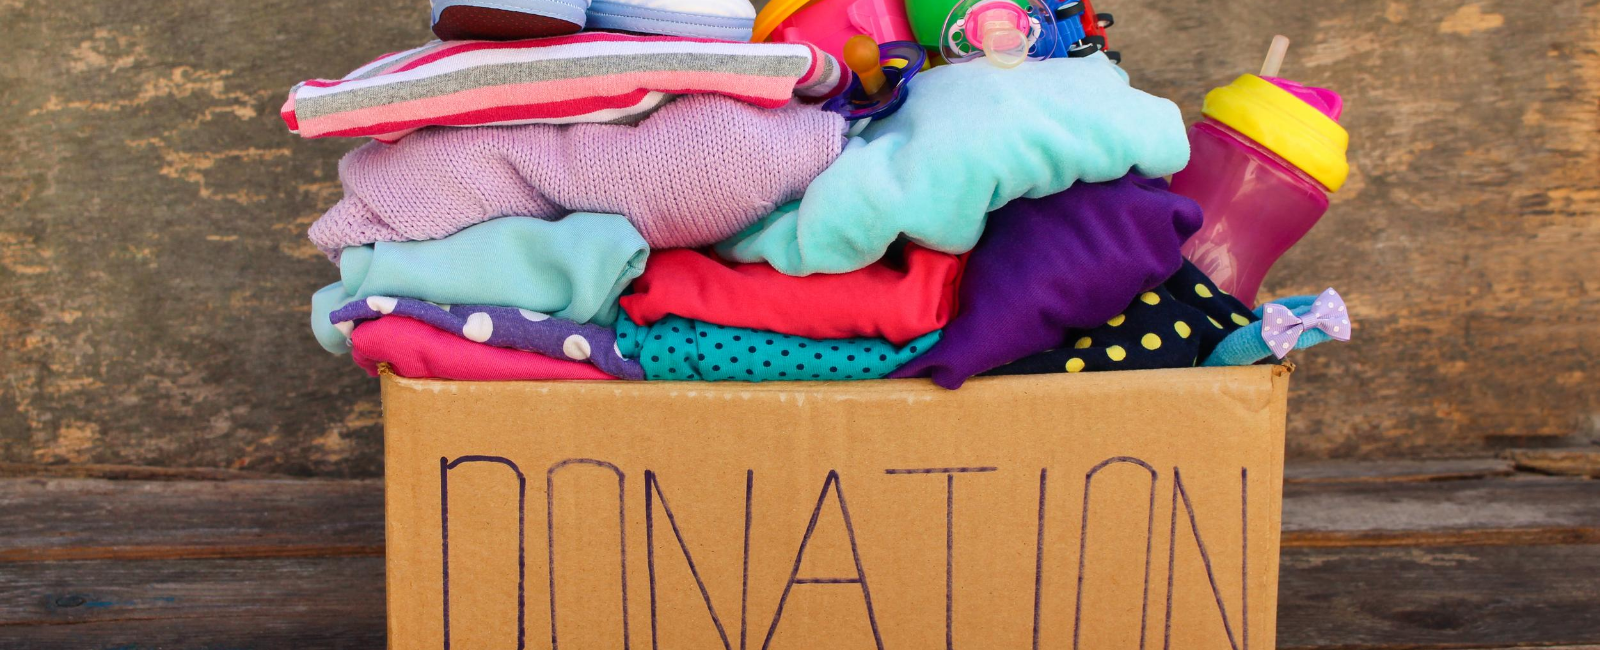 Photo of box of clothing for donation